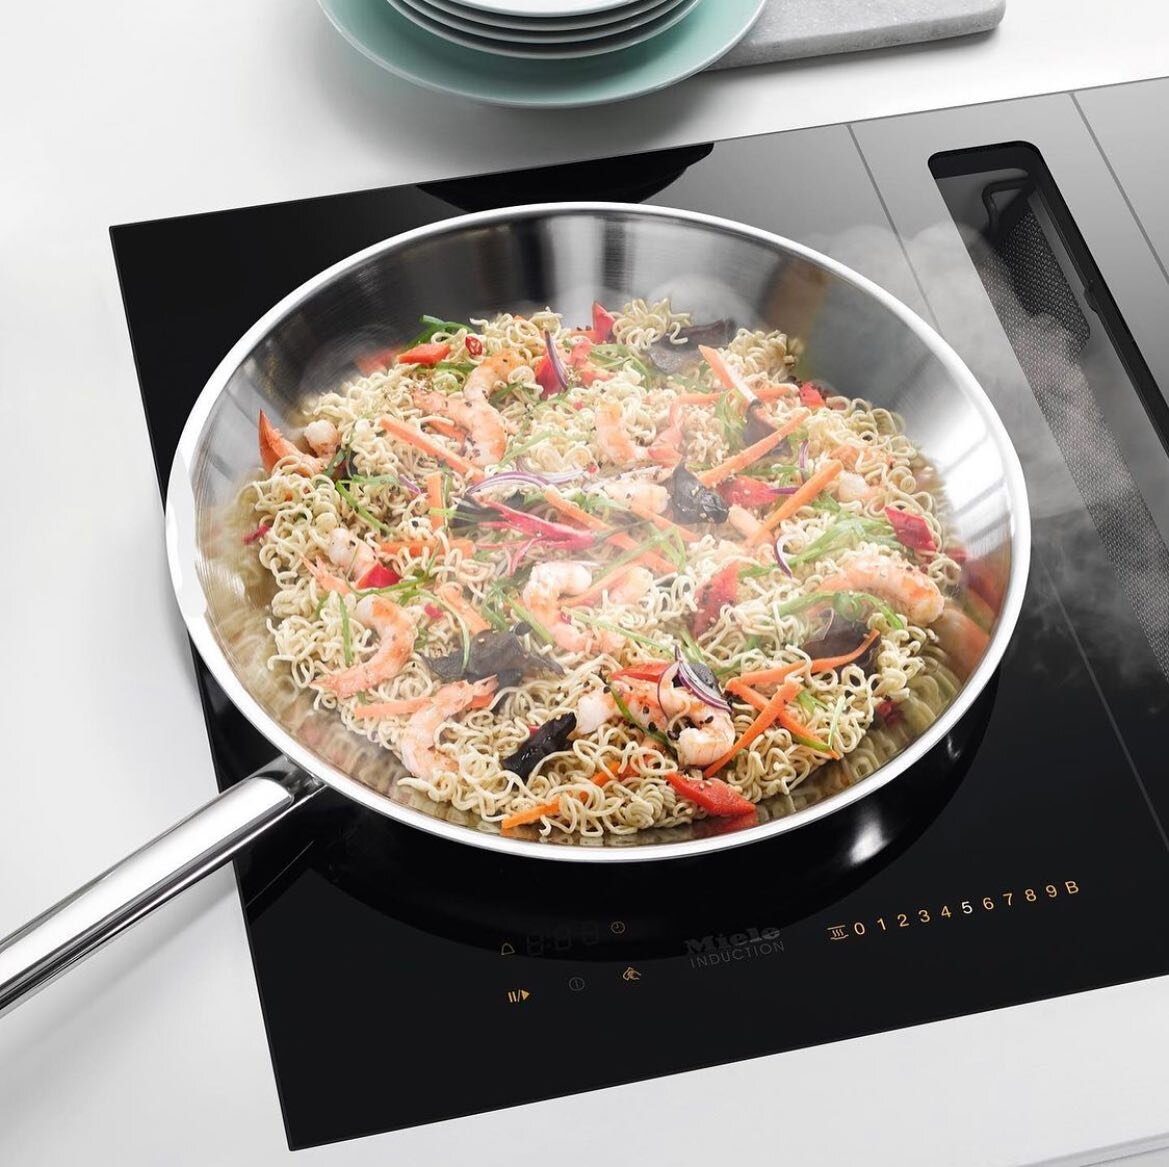 SmartLine elements consisting of an induction wok for stir fry meals and a built-in countertop extractor.